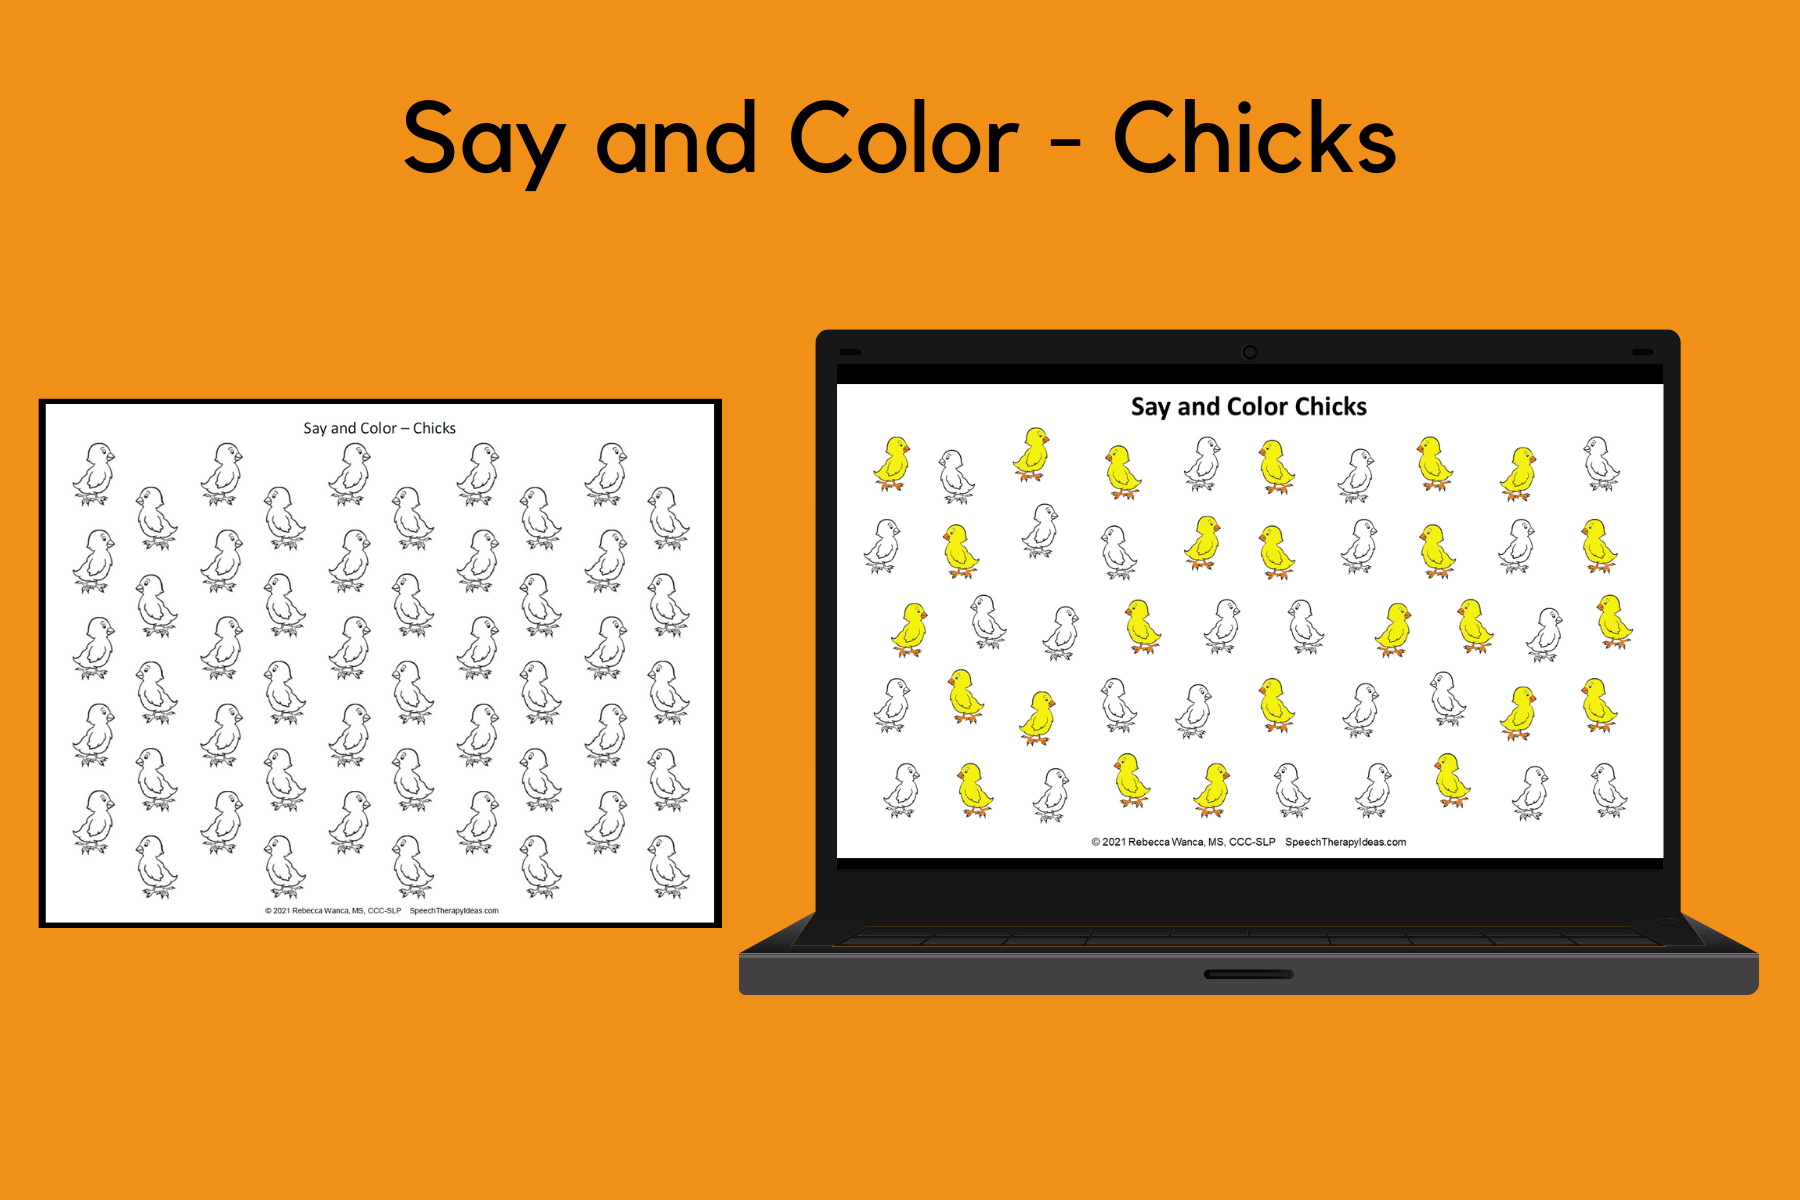 Say and Color – Chicks